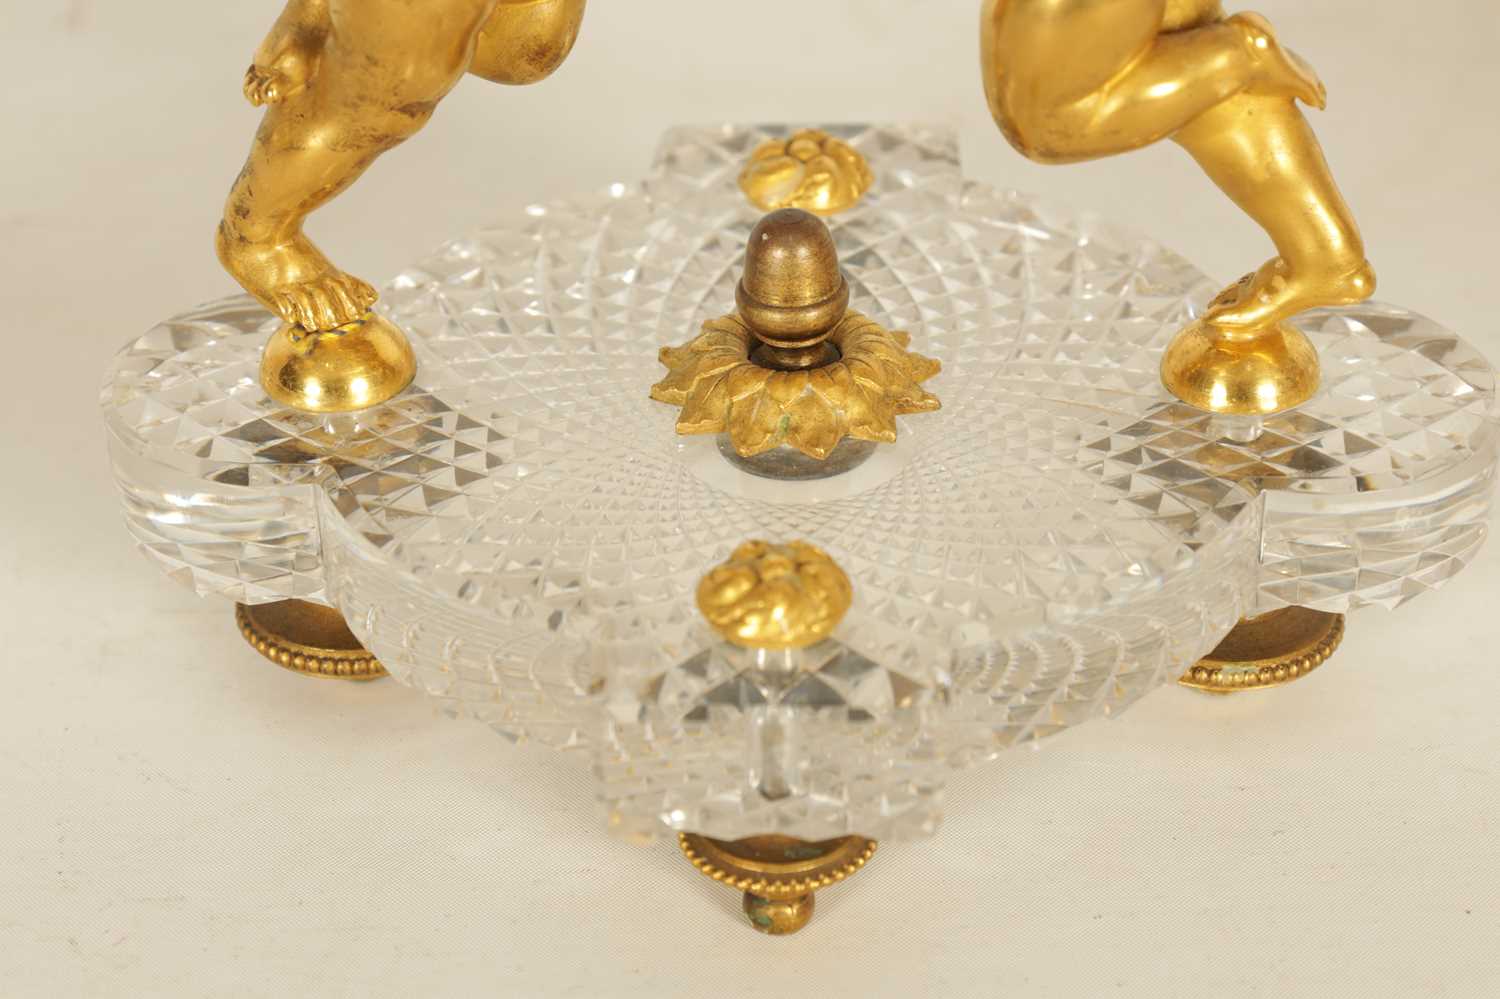 A FINE PAIR OF LATE 19TH/EARLY 20TH CENTURY BACCARAT ORMOLU AND CUT GLASS COMPORTS - Image 3 of 10